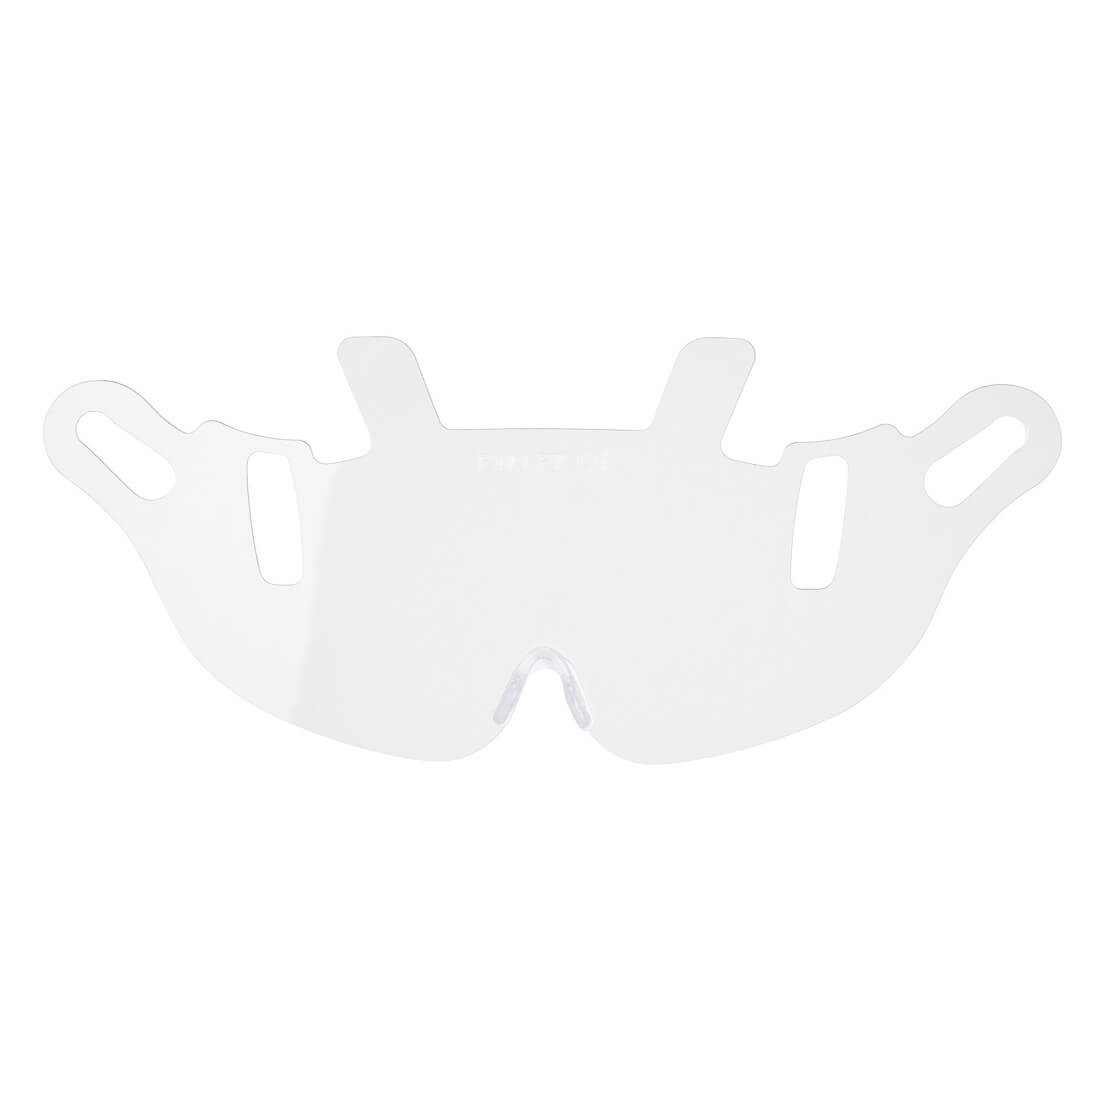 Endurance Visor Replacement - Personal protection